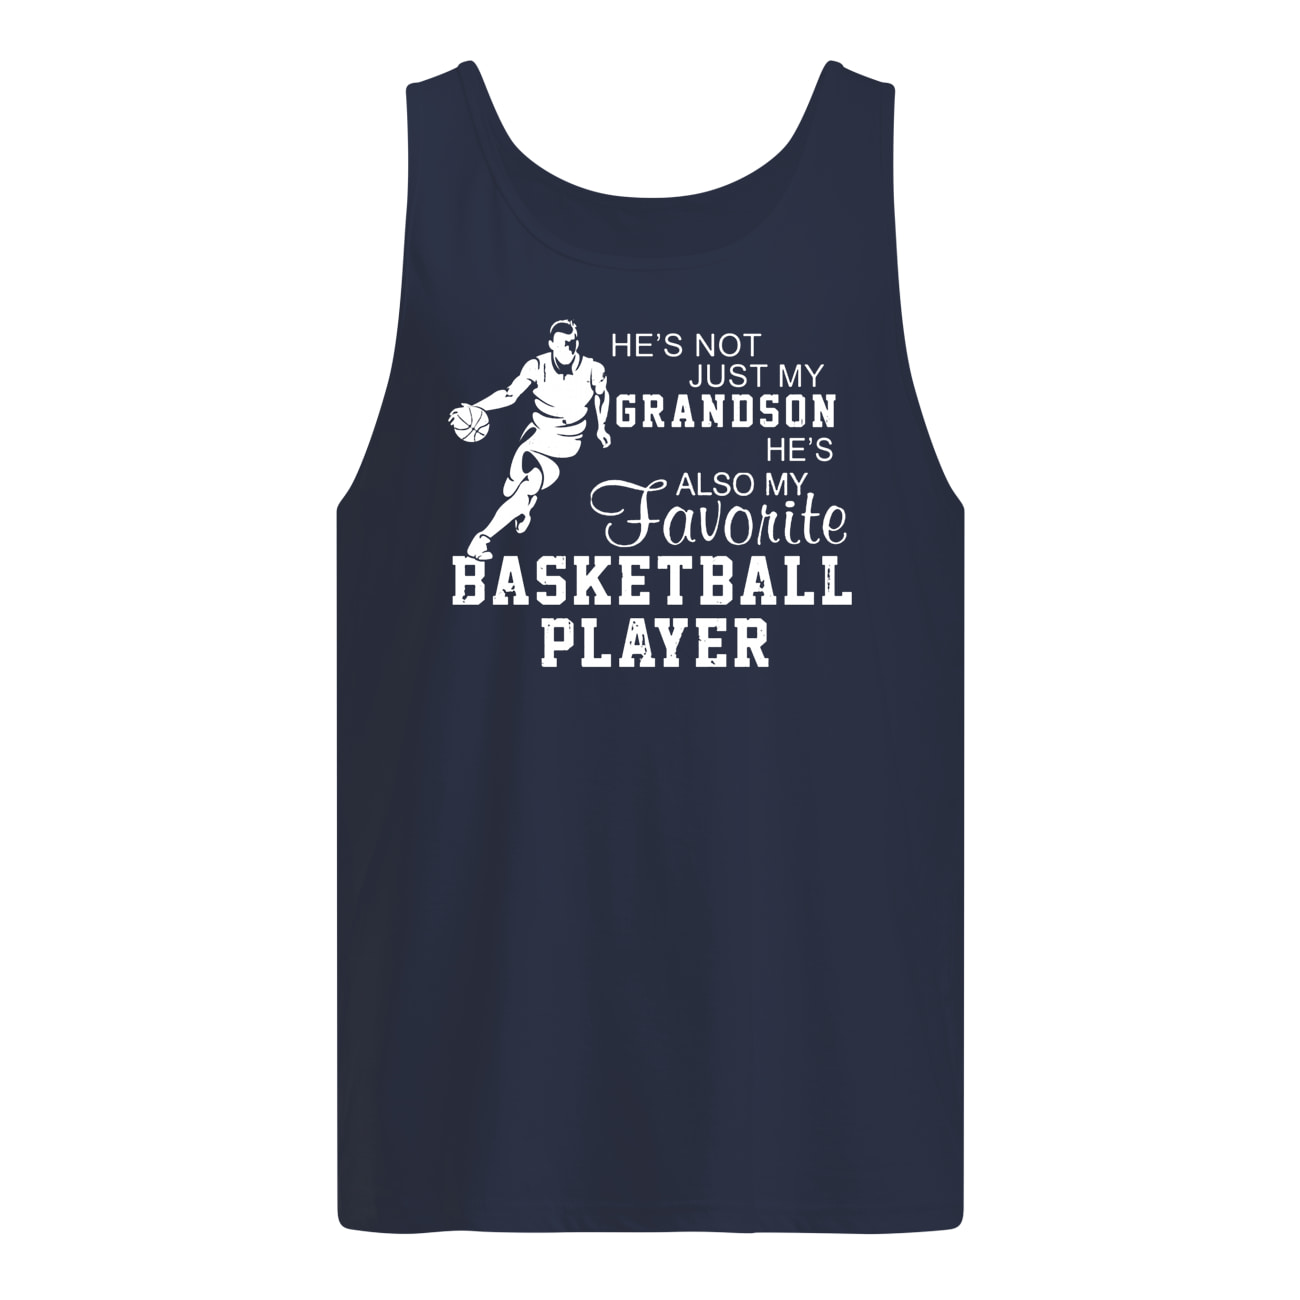 He's not just my grandson he's also my favorite basketball player tank top